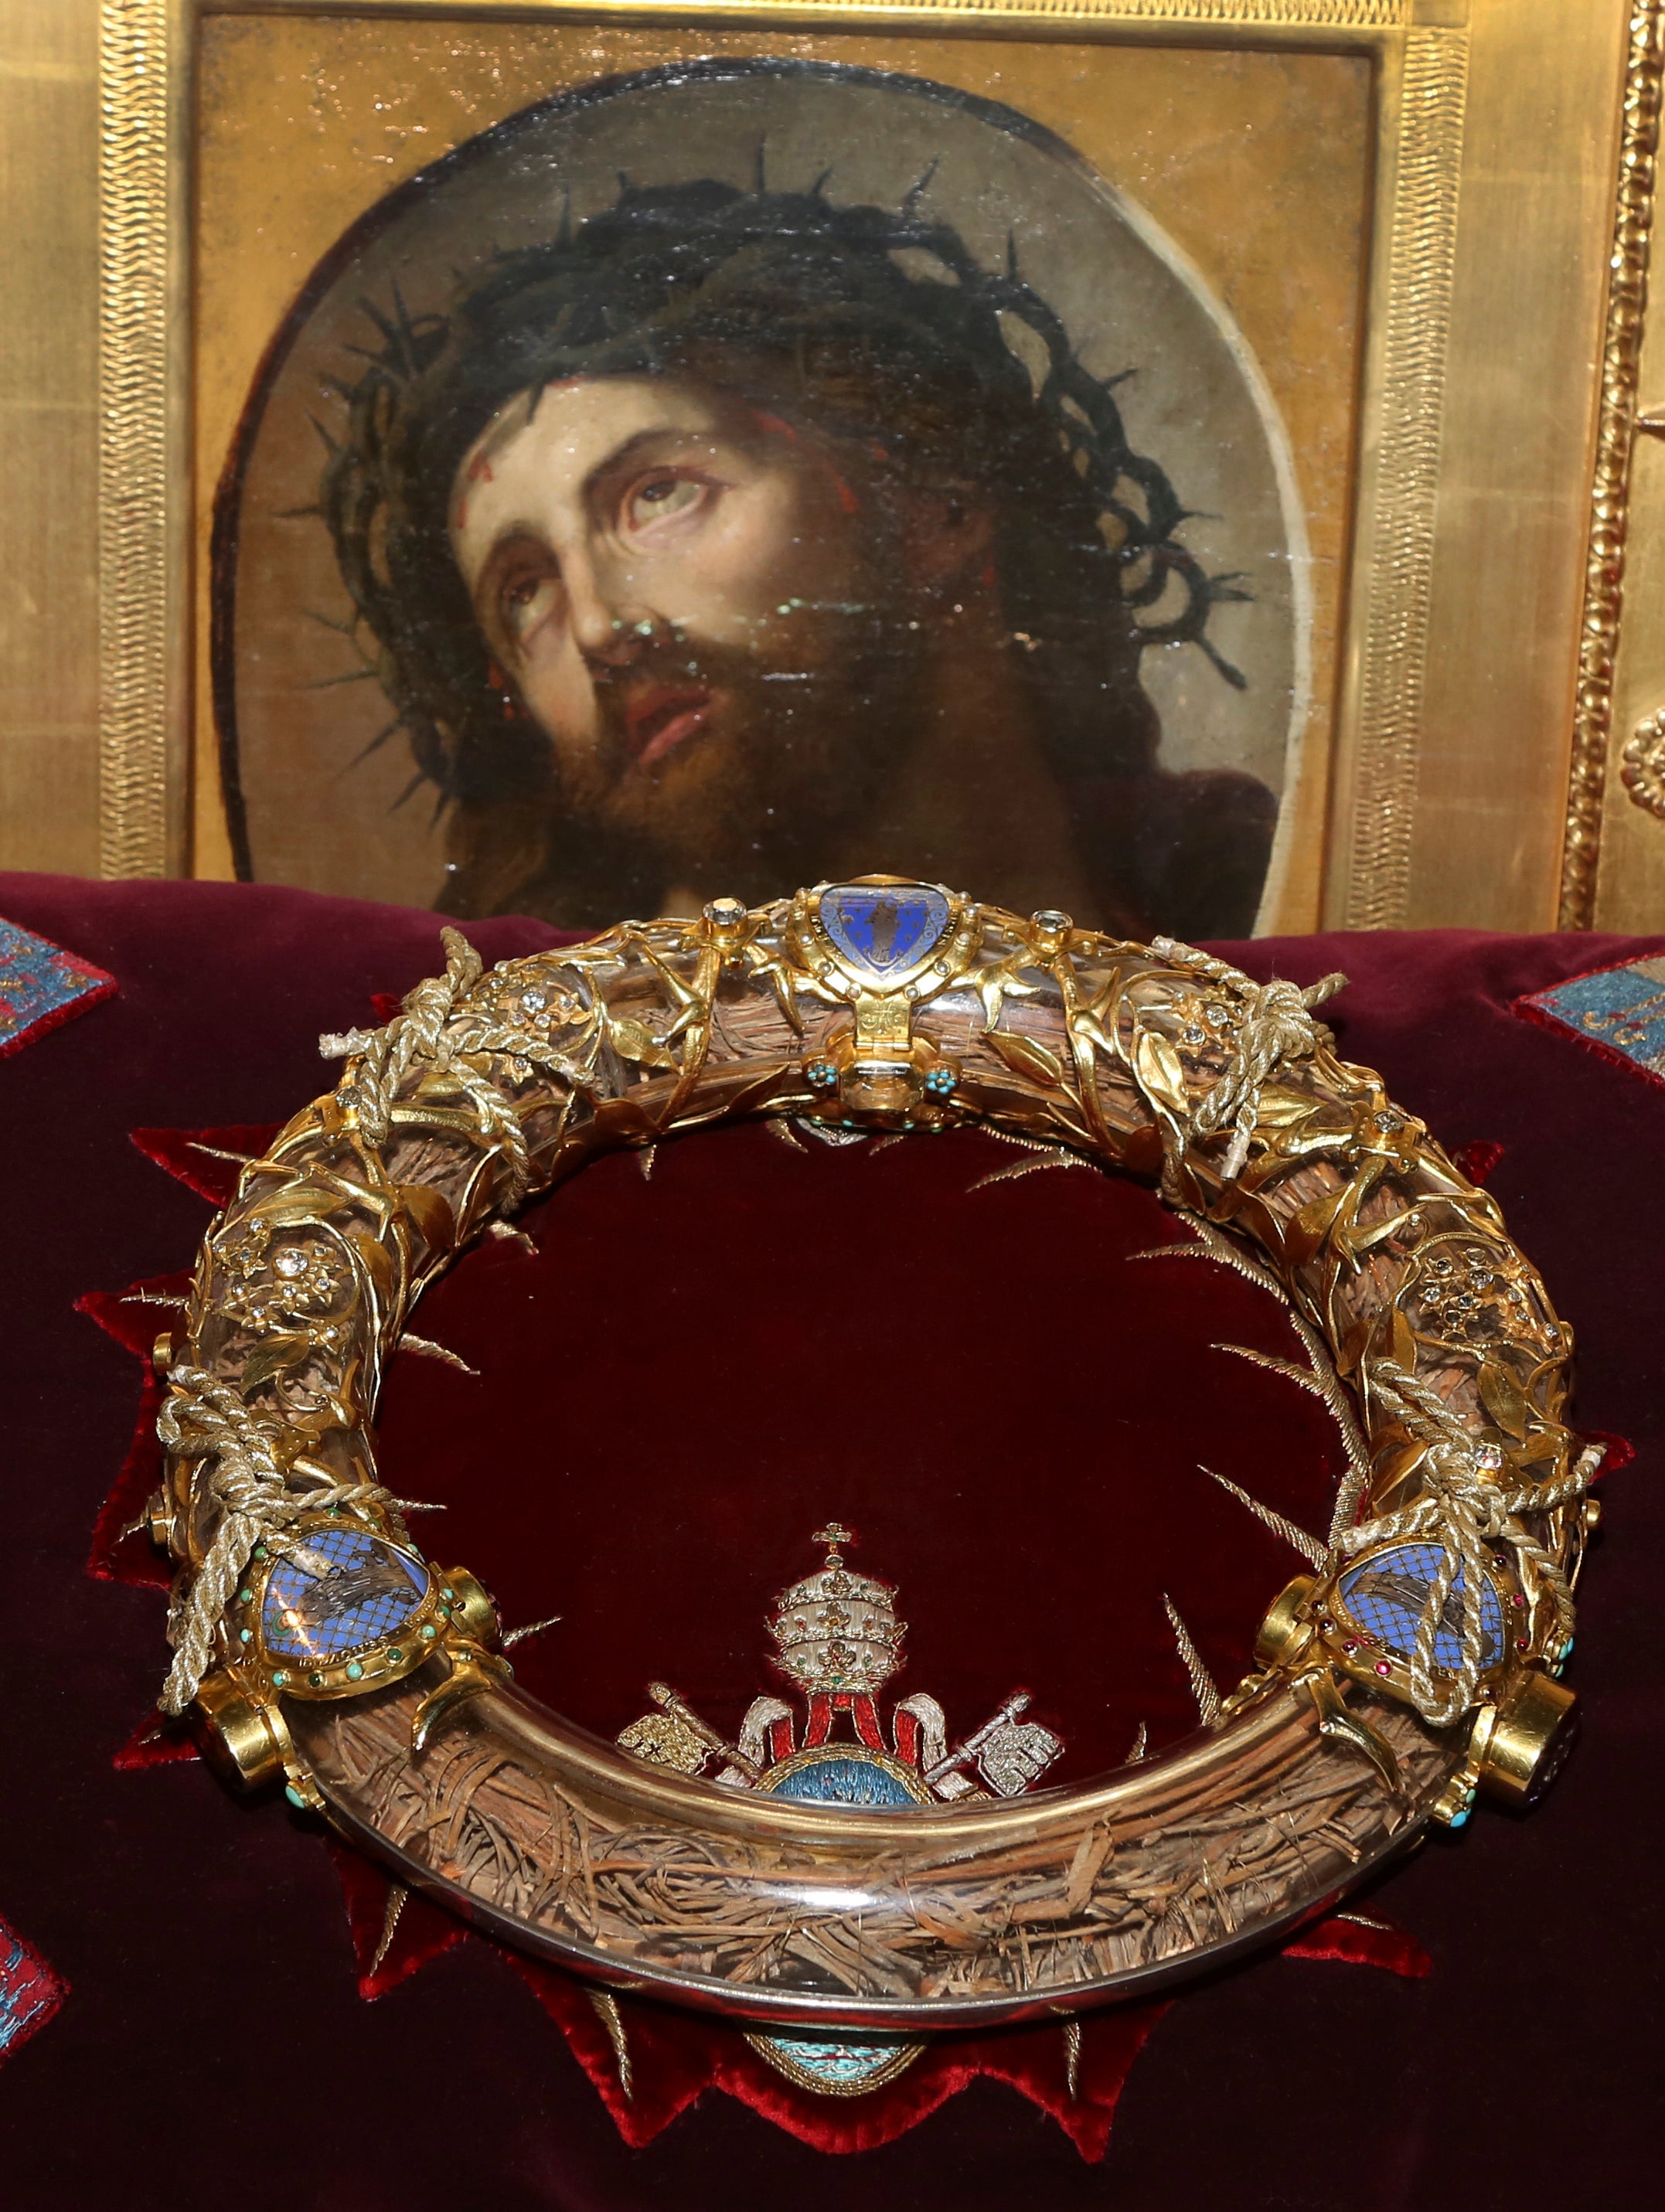 Notre Dame fire: Was the crown of thorns that survived the blaze